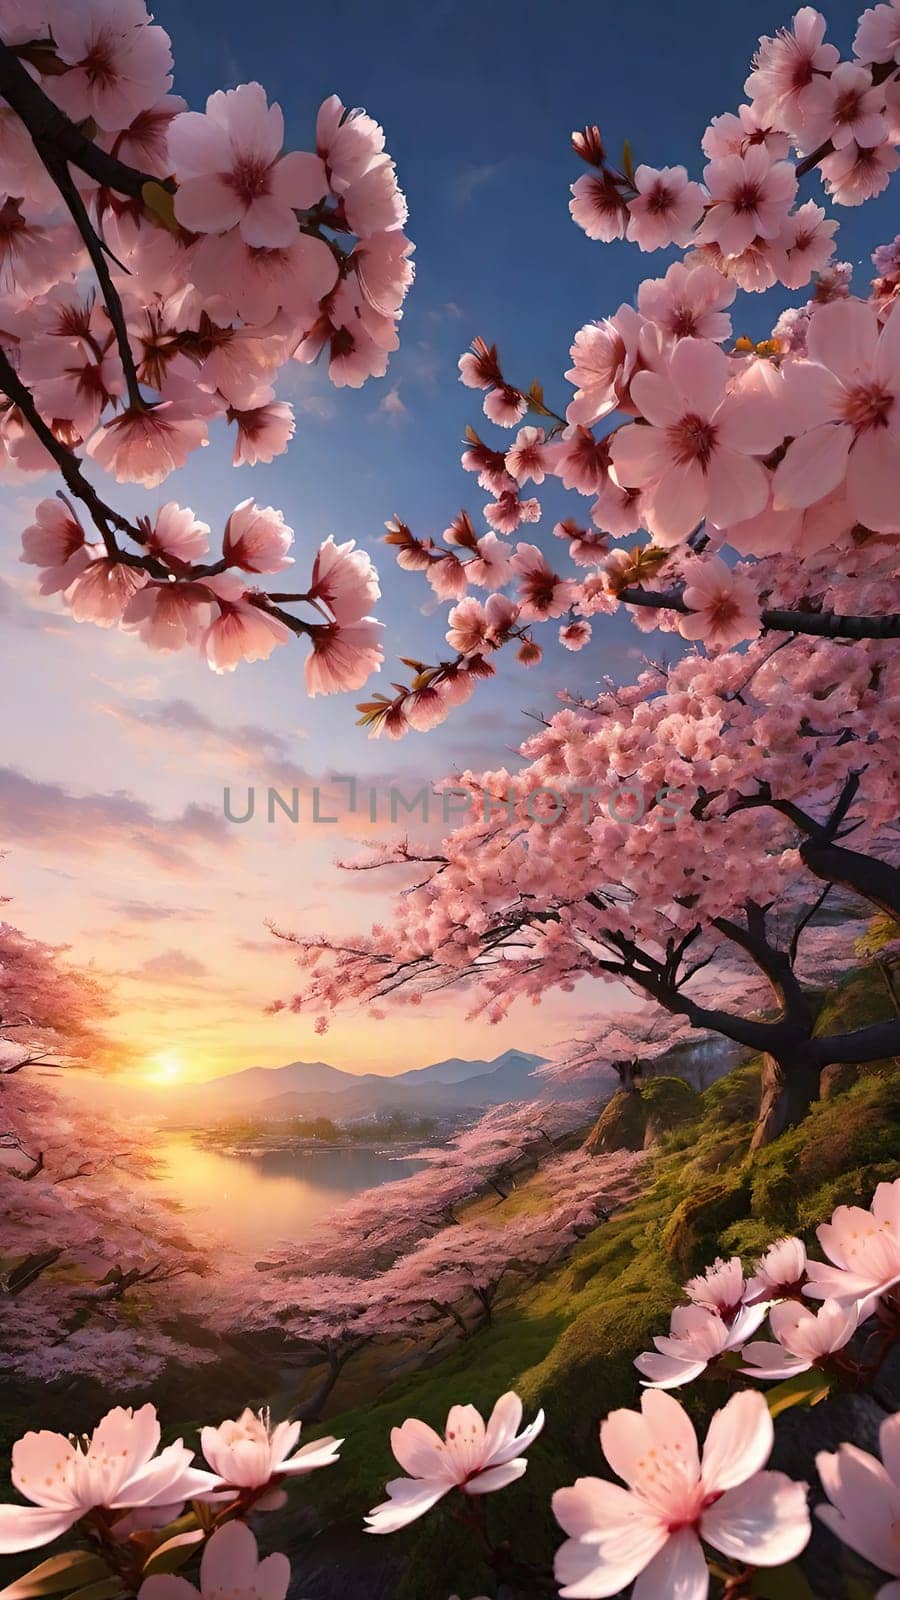 cherry blossom in spring with blue sky background, 3d render.Cherry blossoms in full bloom on the background of the sunset.cherry blossom in spring season with mountain background, digital painting.